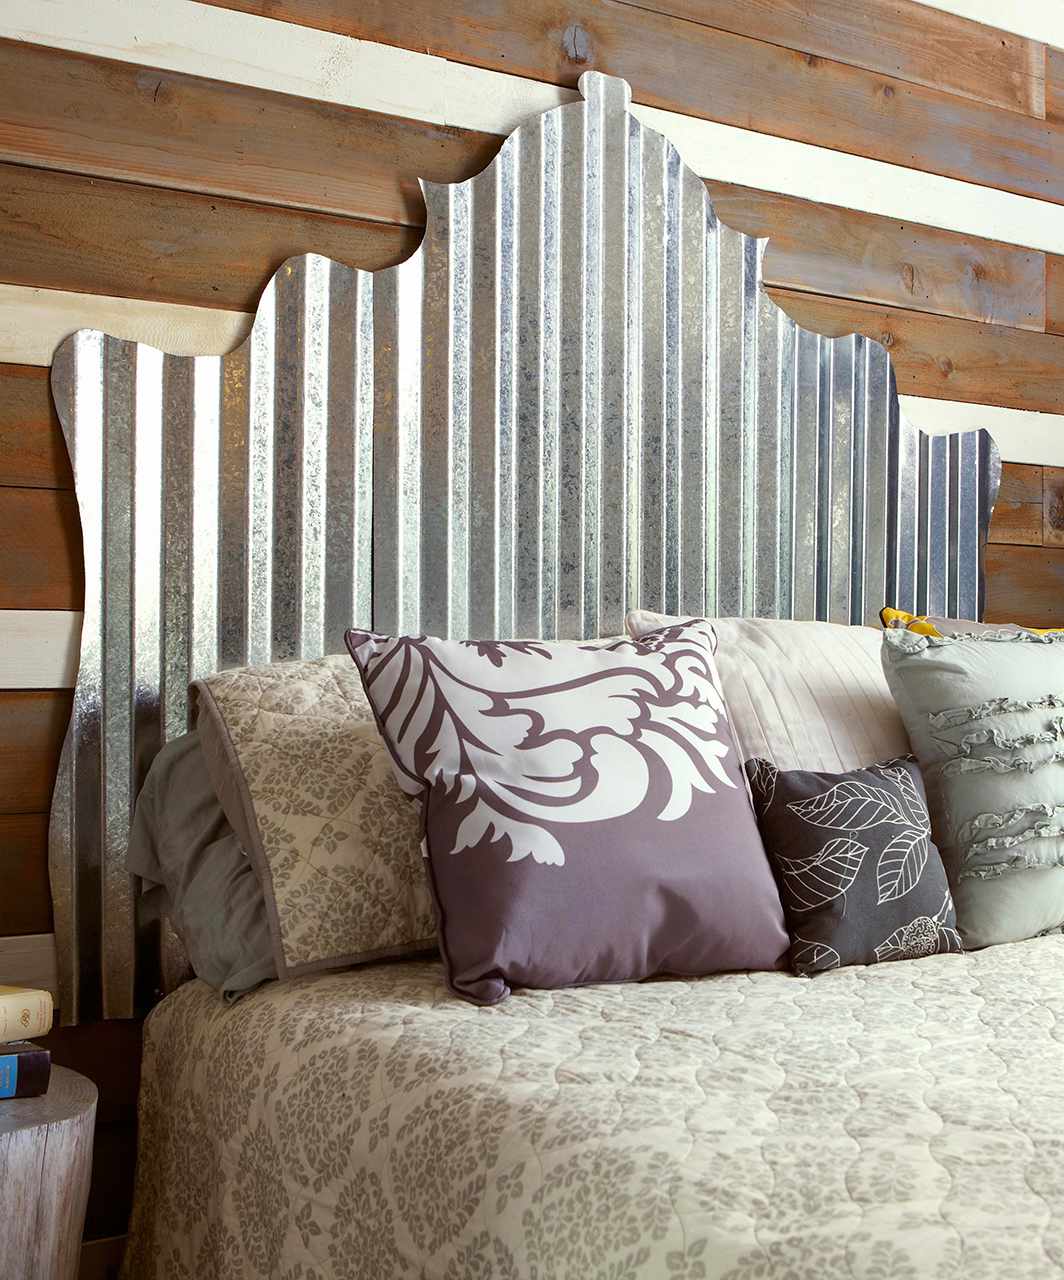 38 Diy Headboard Ideas For A Low Cost Bedroom Refresh Better Homes Gardens